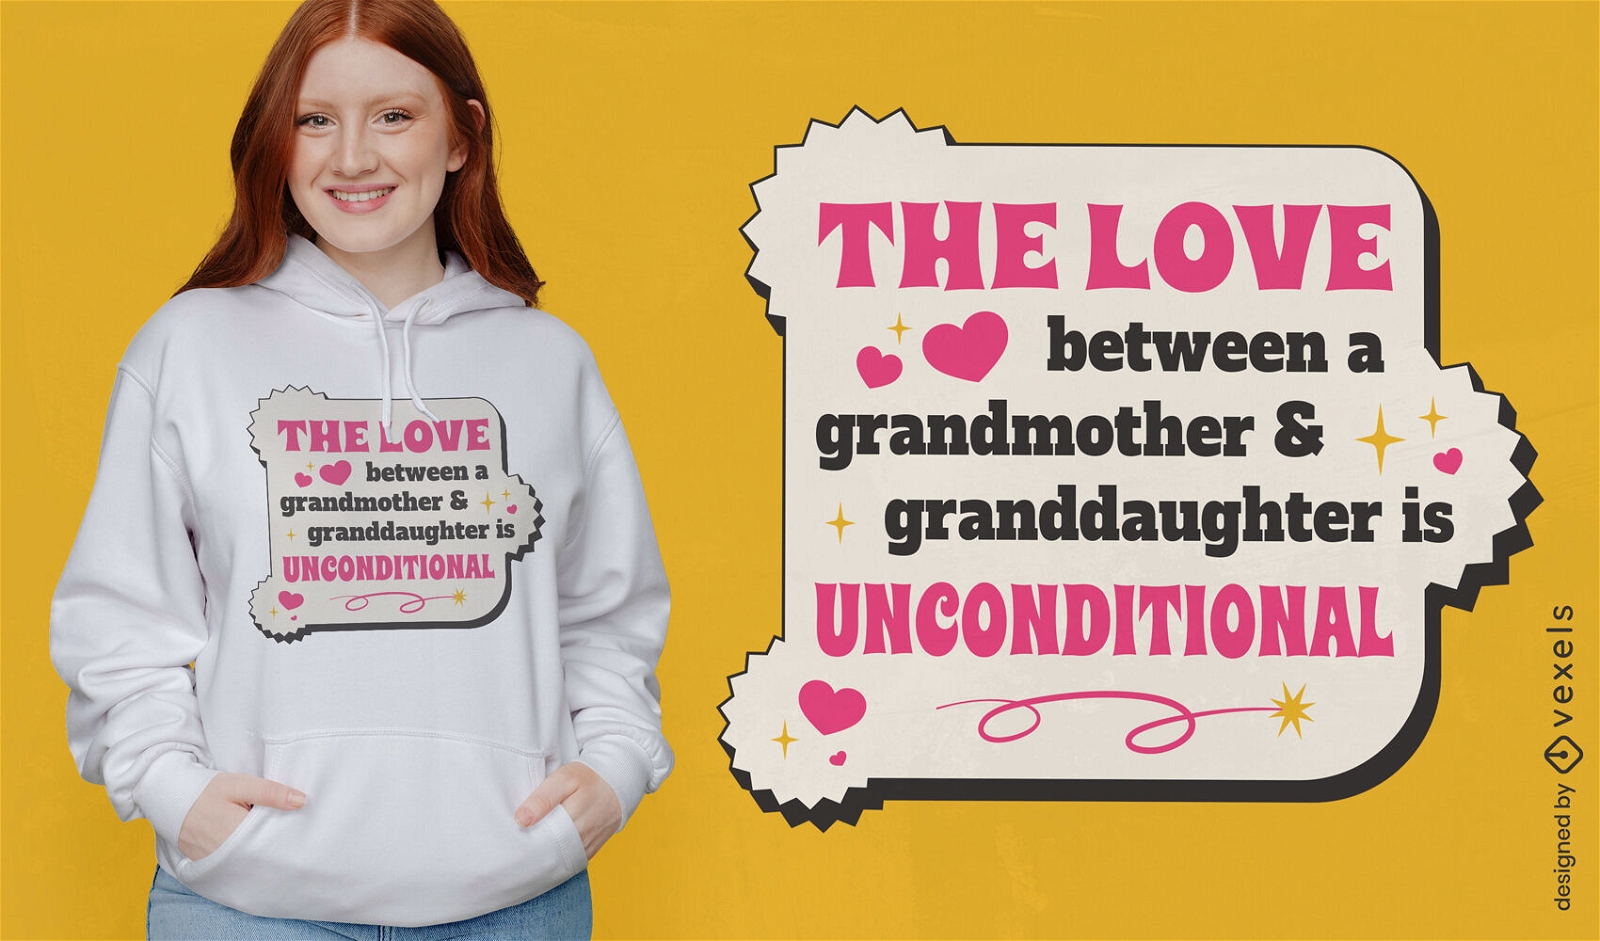 Grandmother love quote t-shirt design